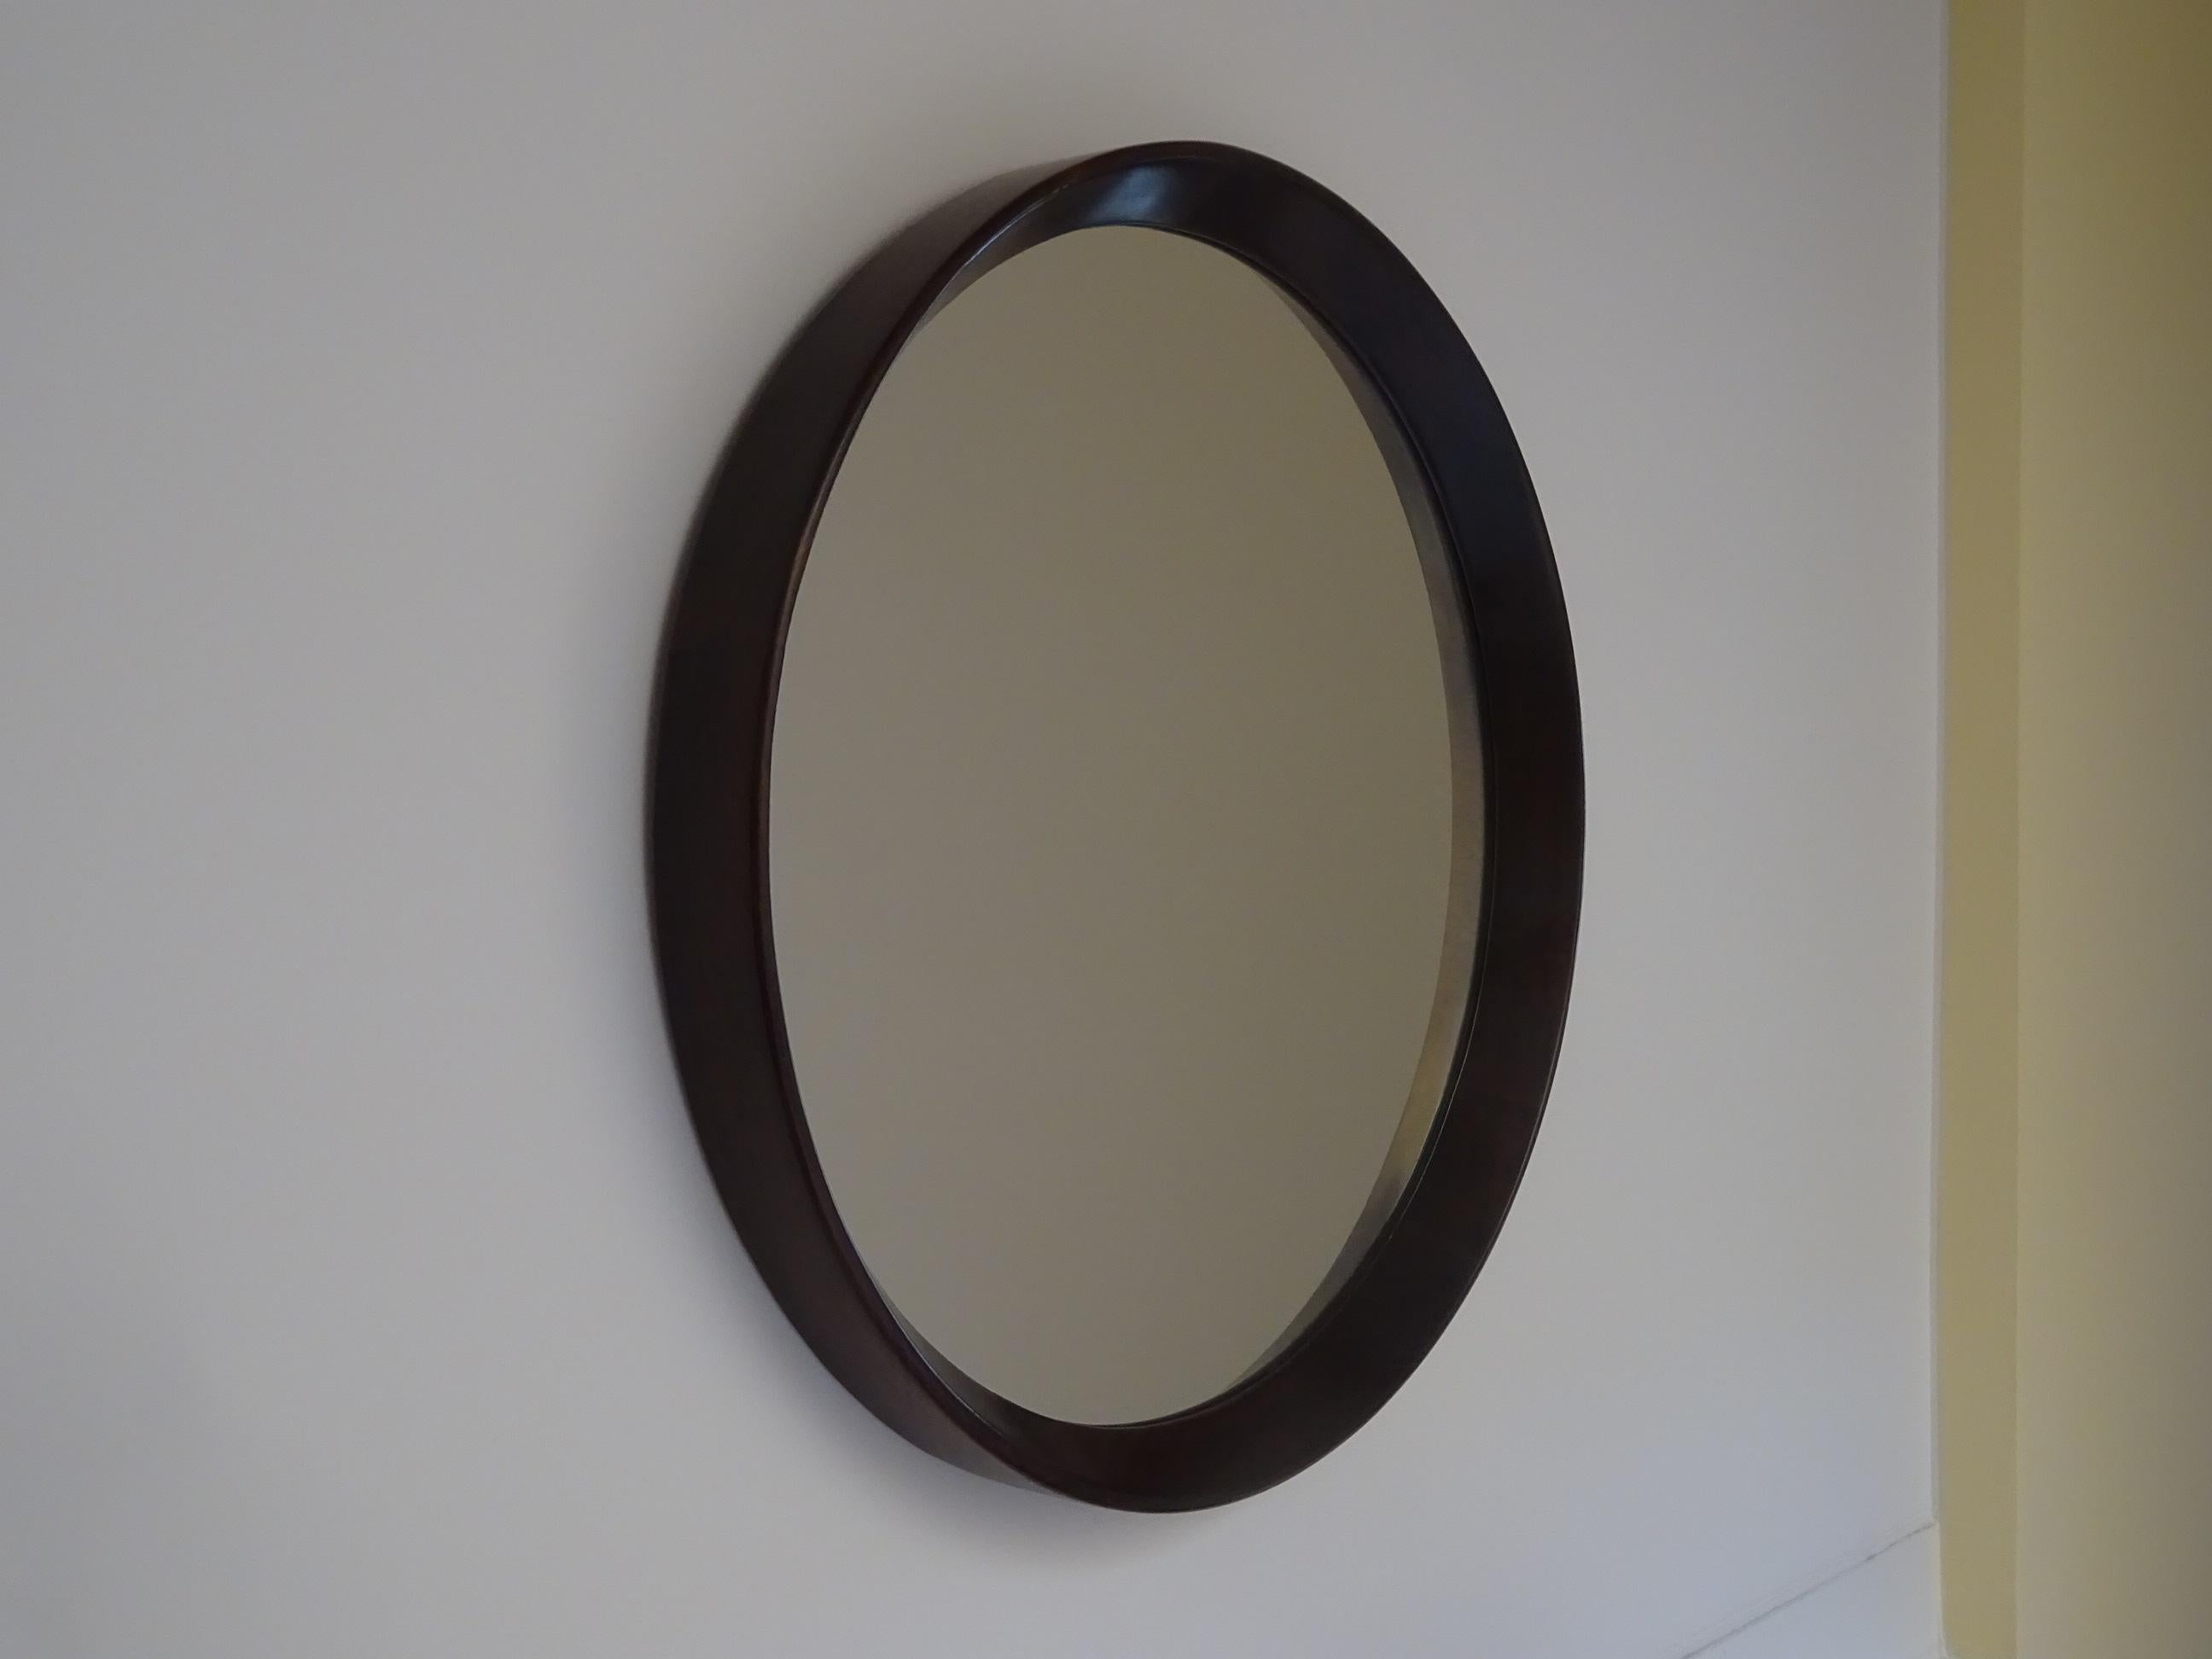 Round mirror in solid Brazilian wood, probably designed by Sérgio Rodrigues.